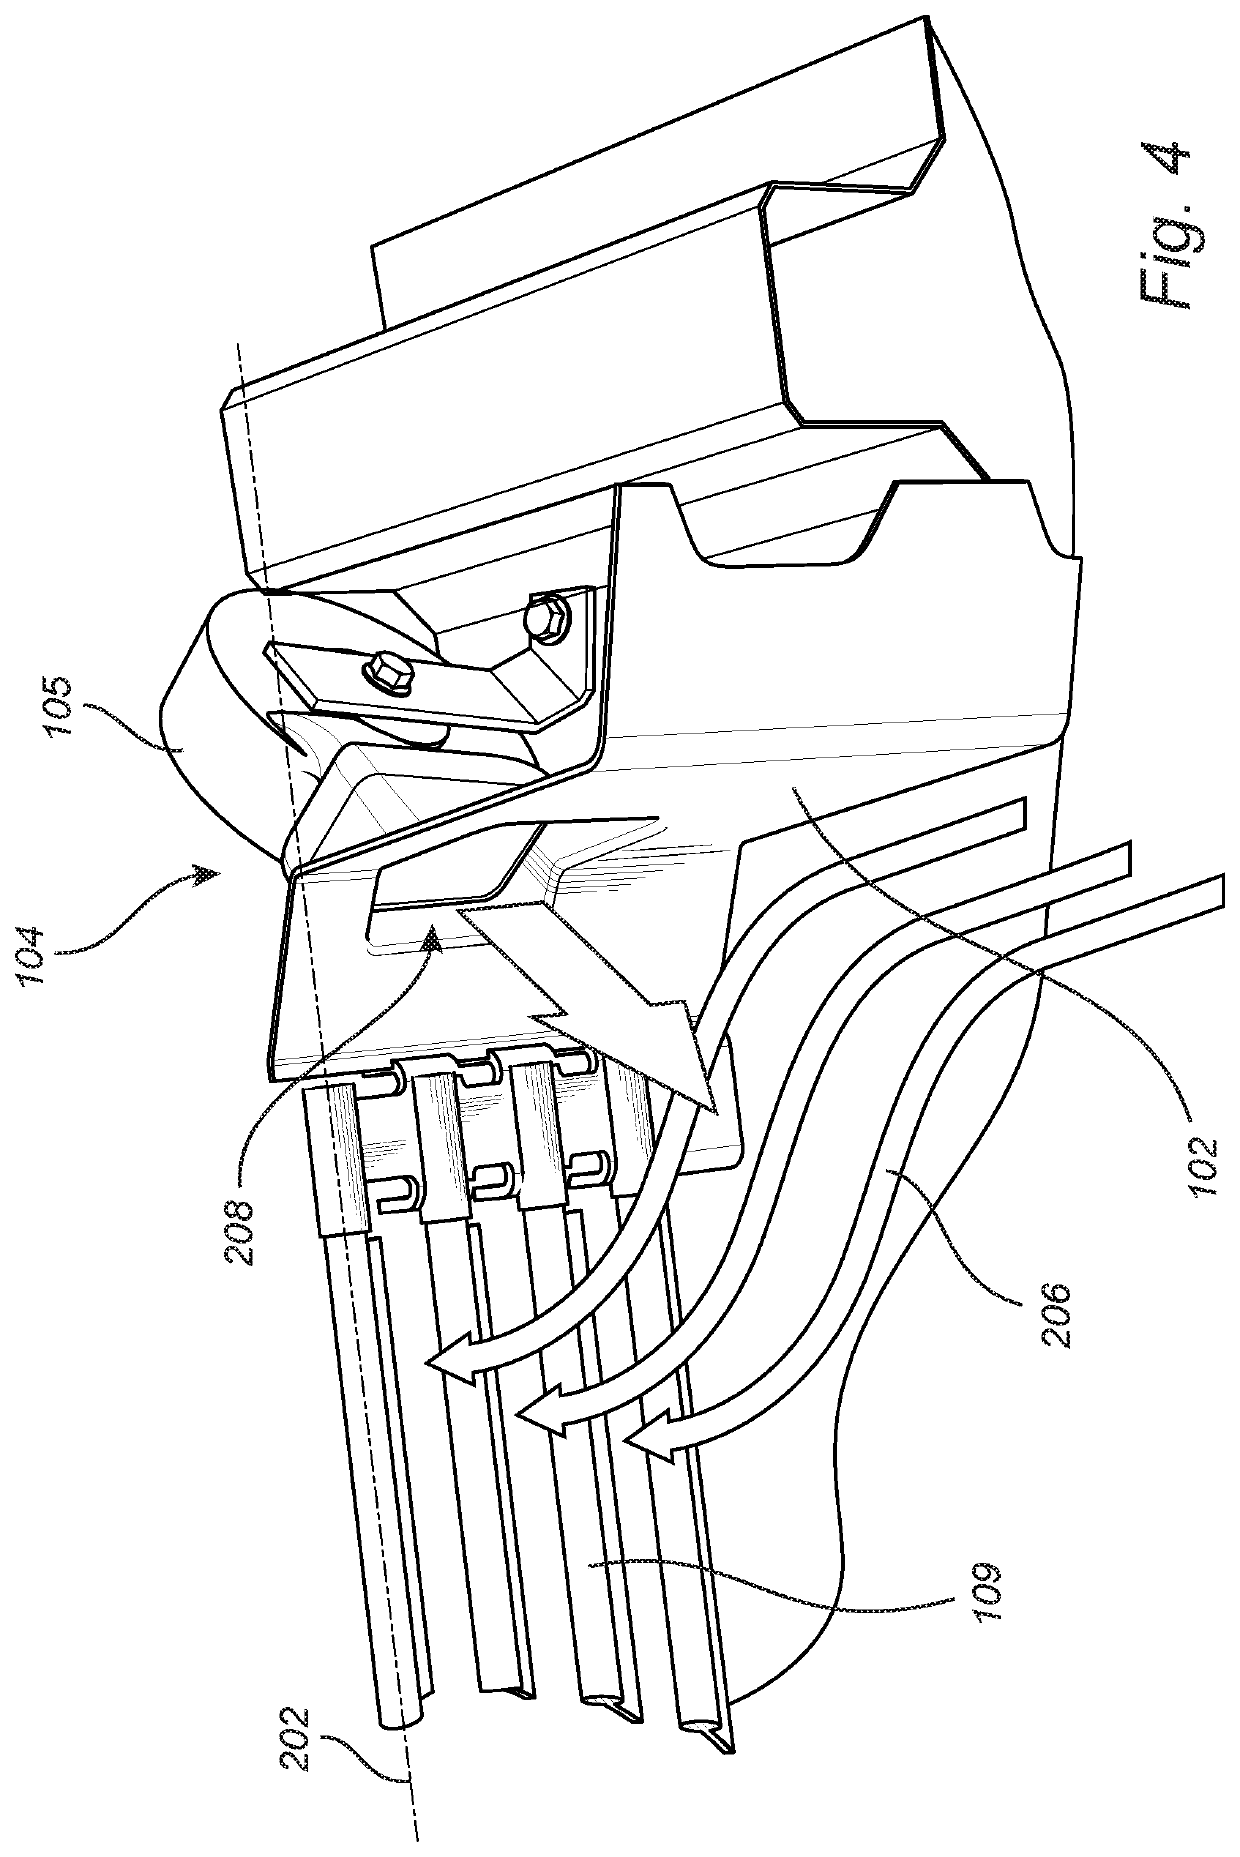 Vehicle front structure comprising a horn